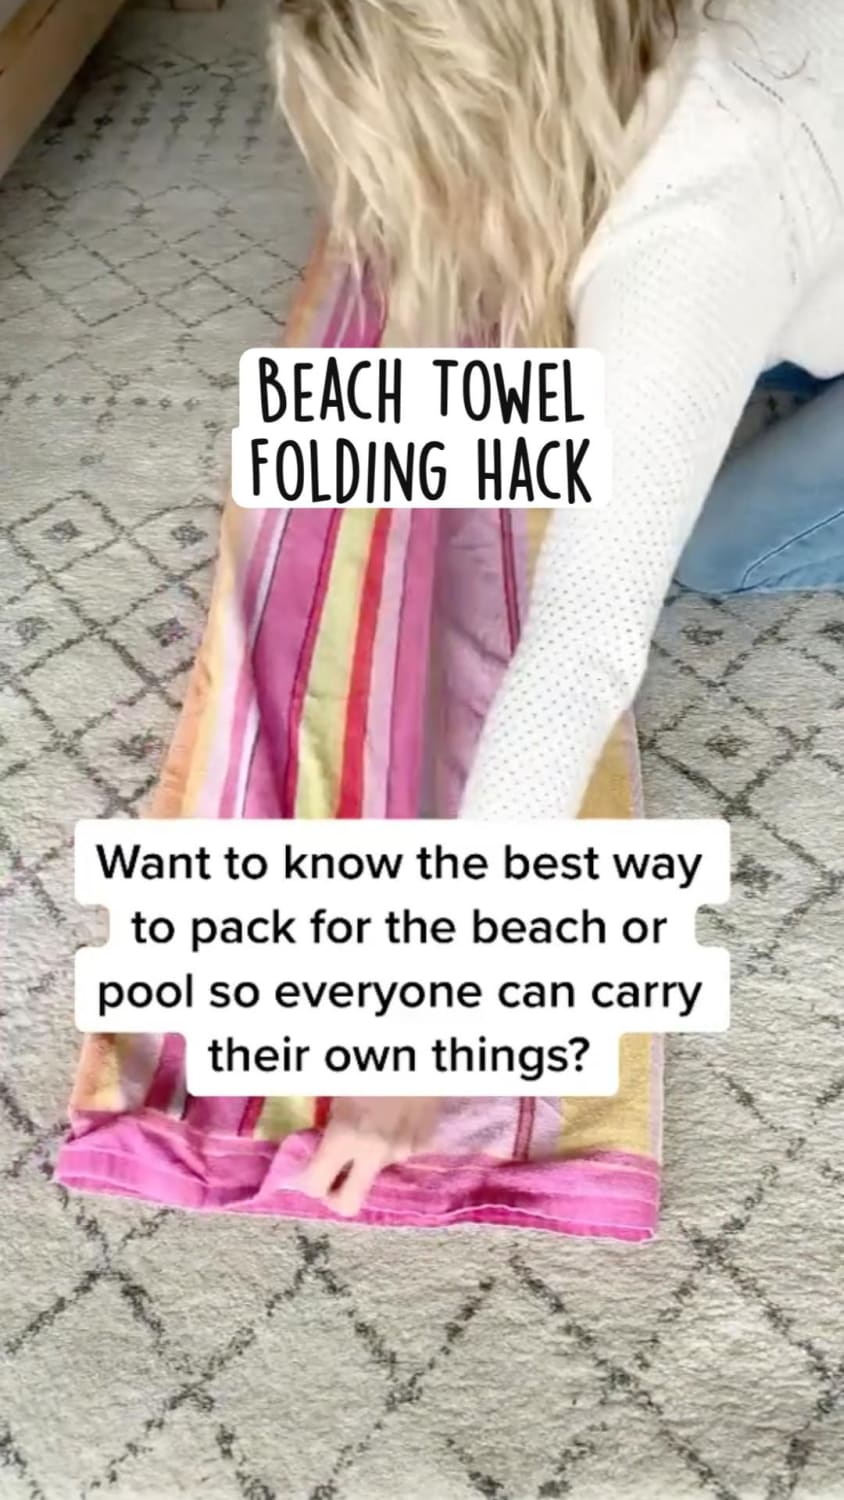 Beach Towel Folding Hack..try this the next time you go to the beach! Follow @clairelynnhome!